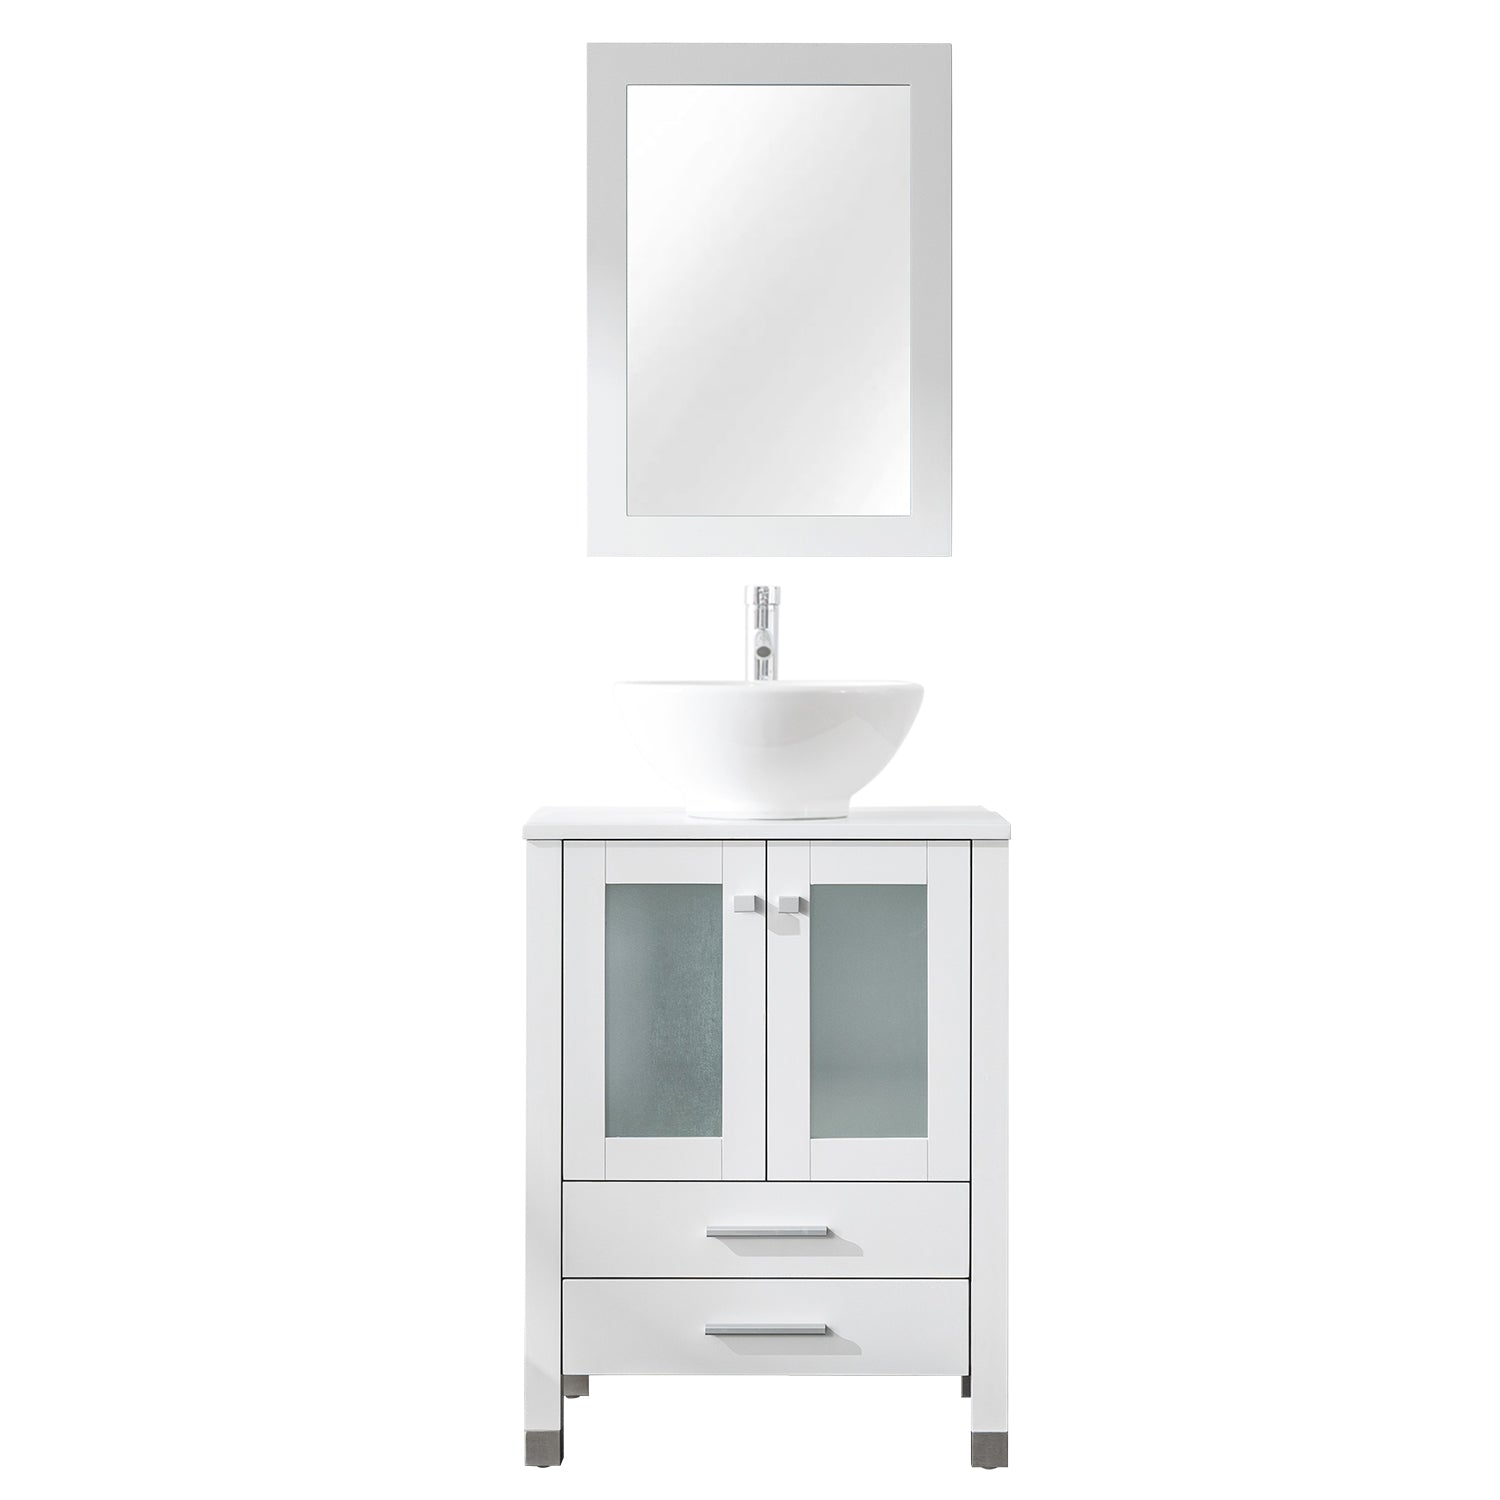 Eclife 24" Bathroom Vanity Solid Wood Construction & Painted Frame W/Mirror - White